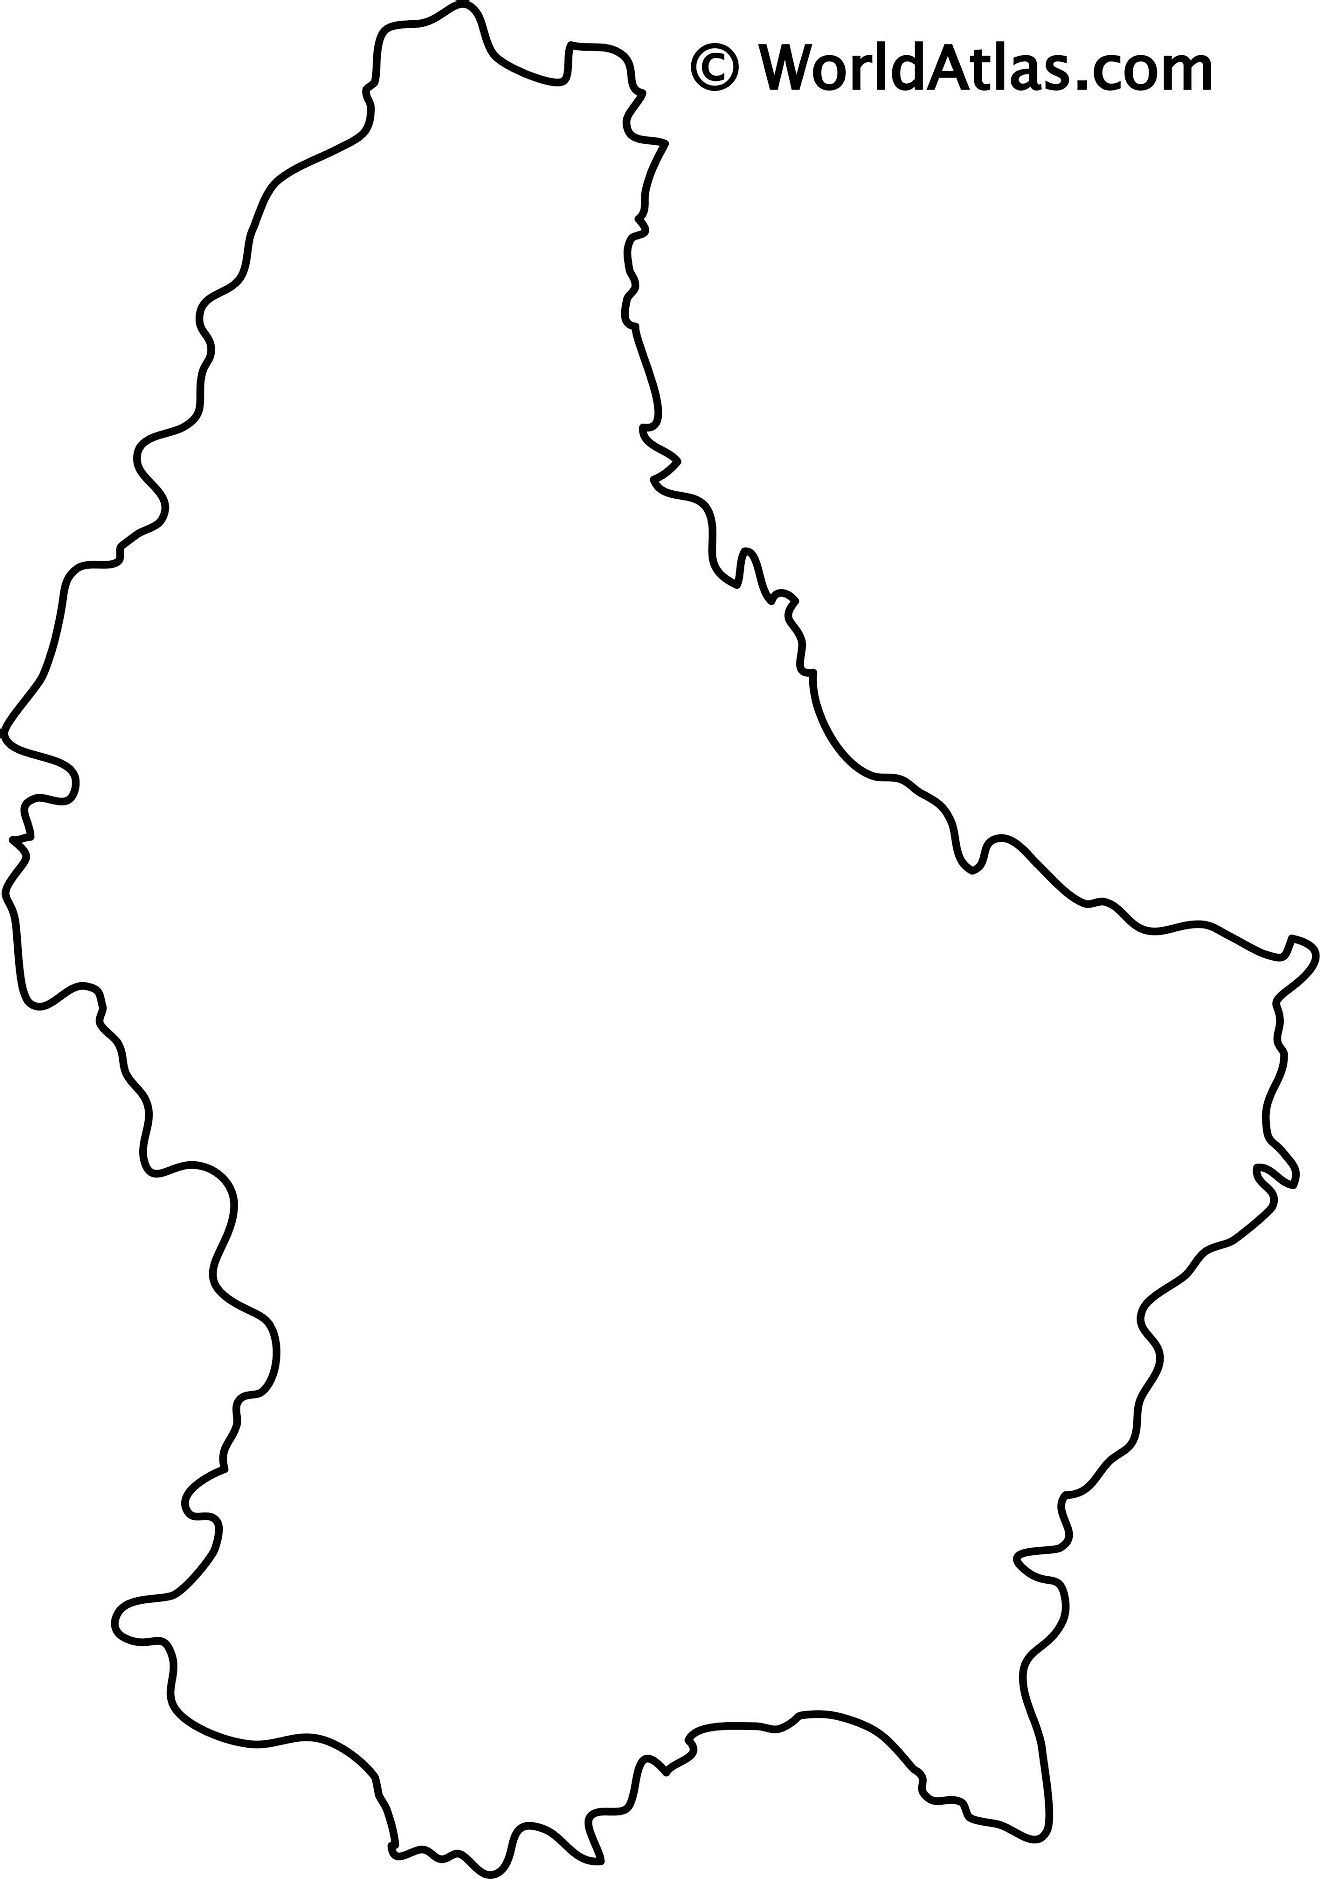 Blank Outline Map of Luxembourg